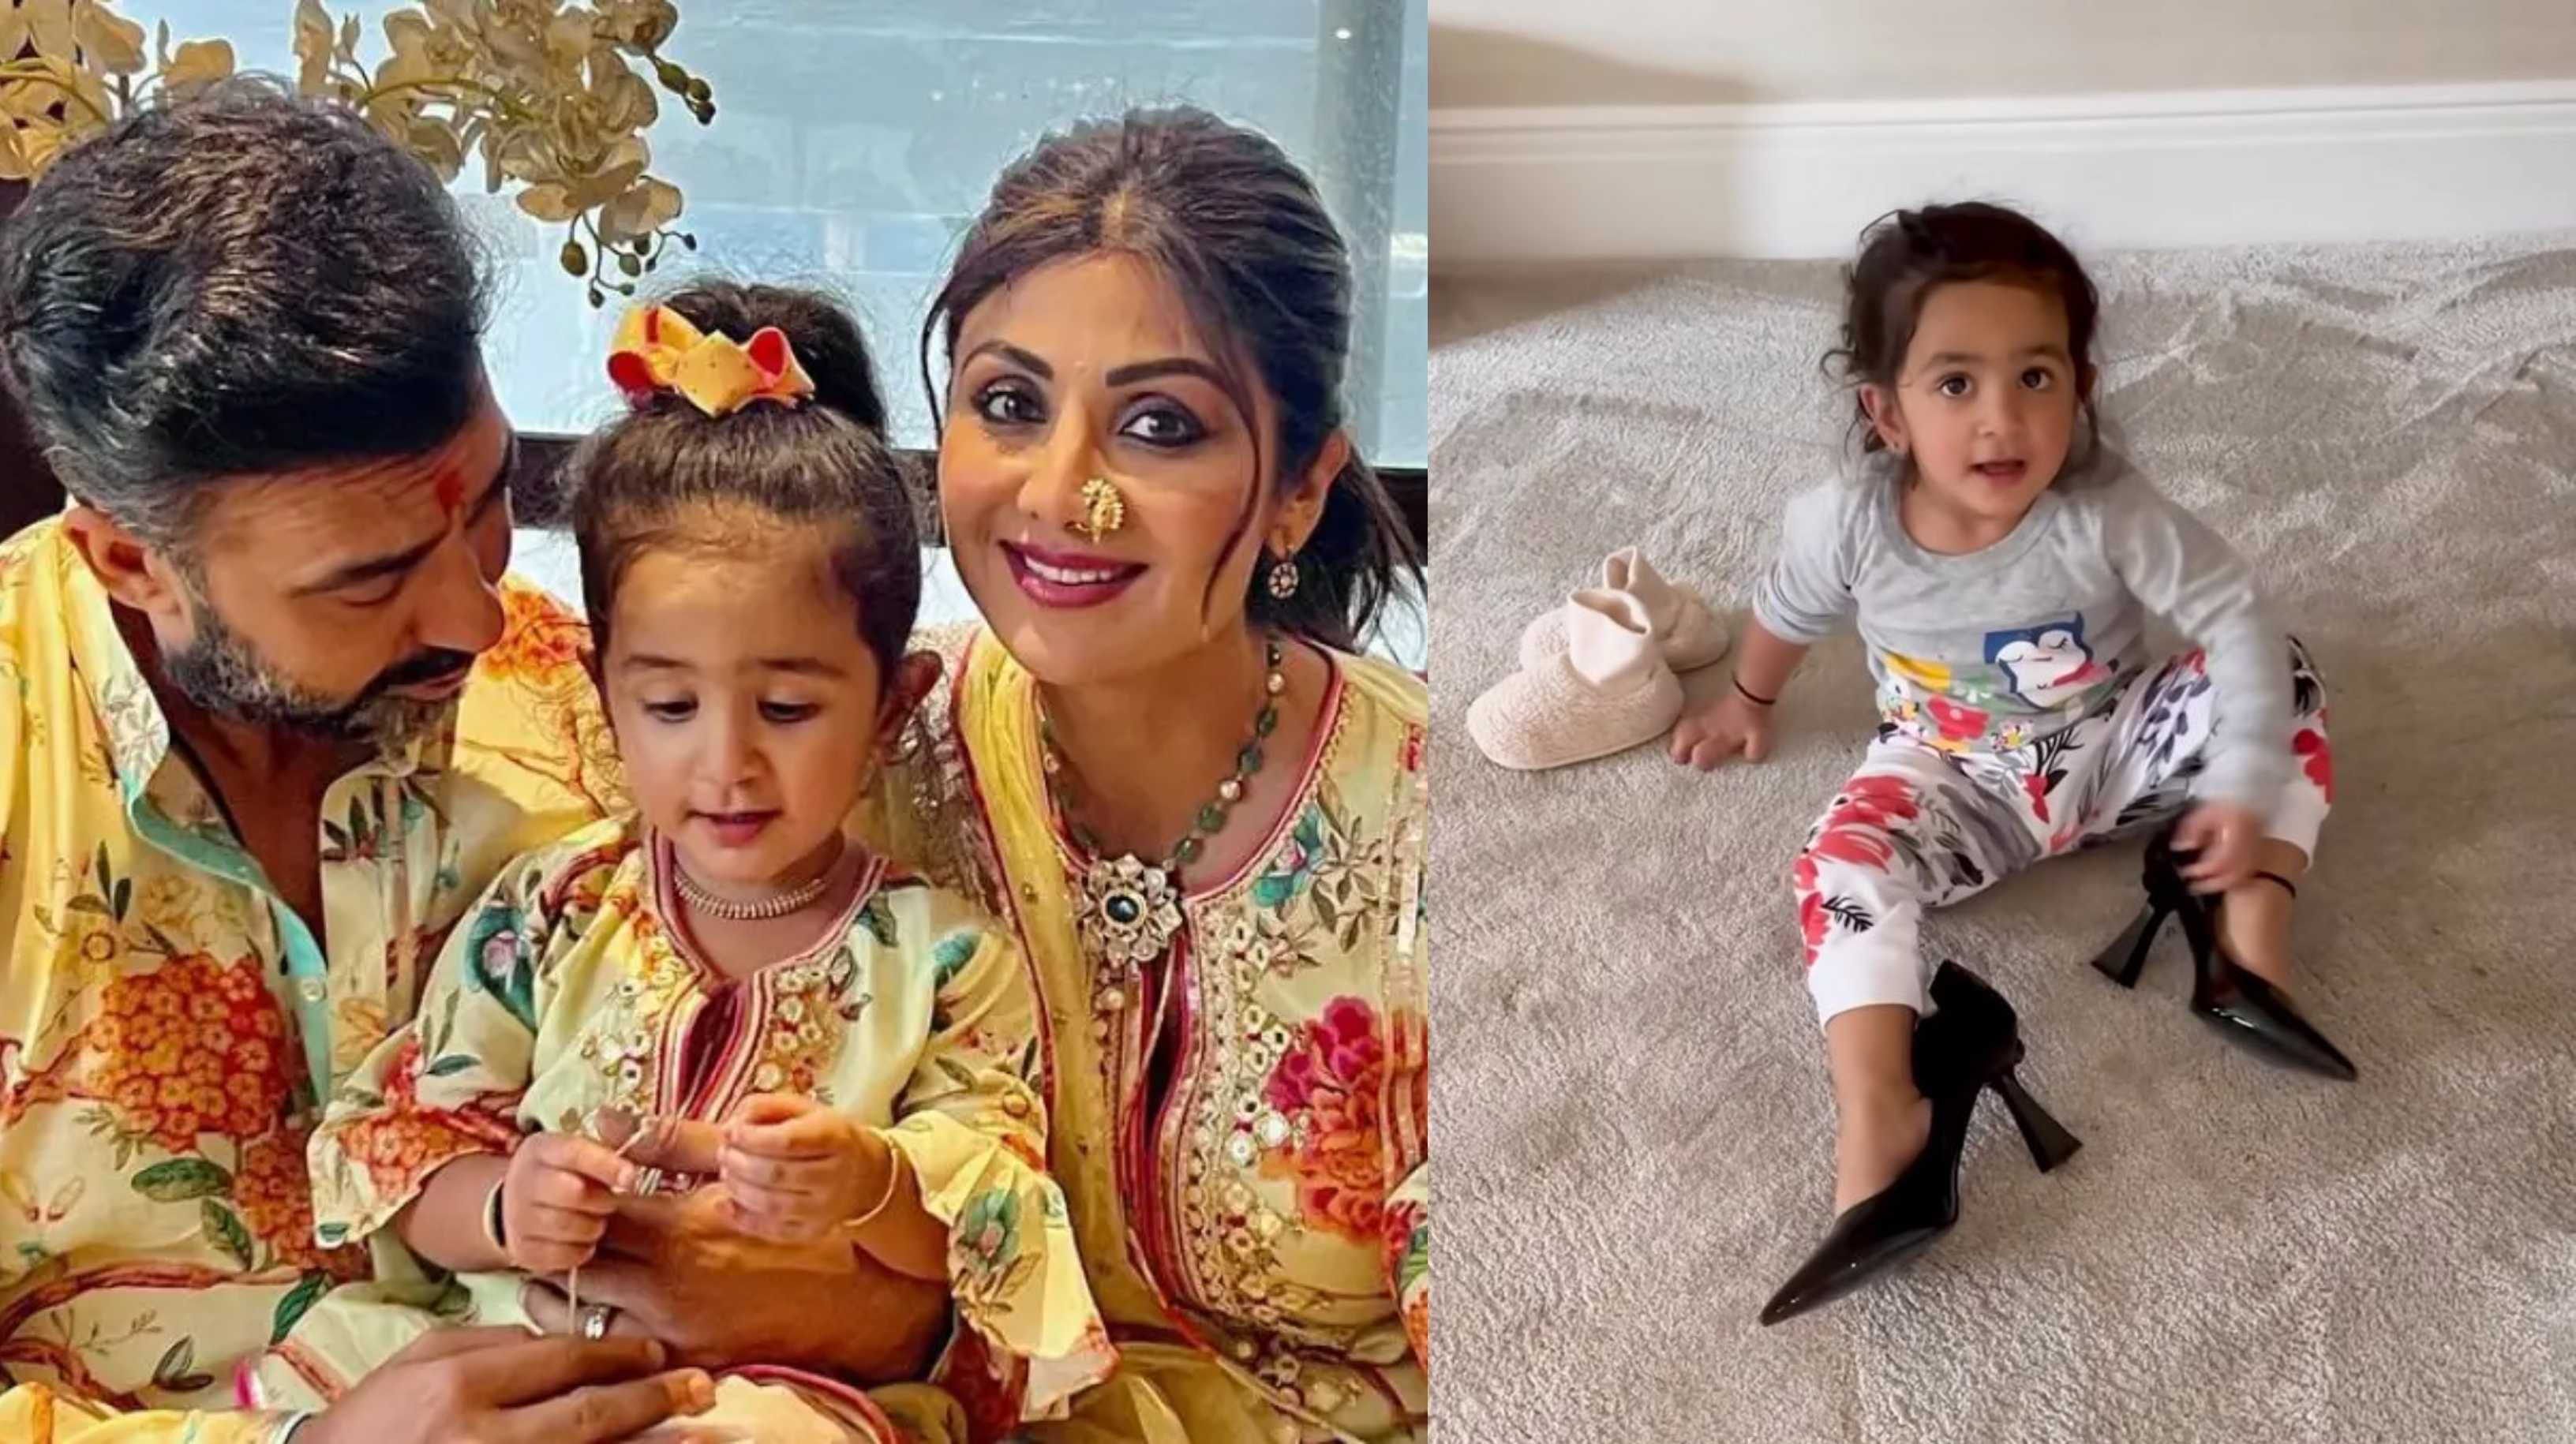 Shilpa Shetty’s daughter Samisha confuses her high heels for Raj Kundra’s shoes as she tries to fit her feet into them